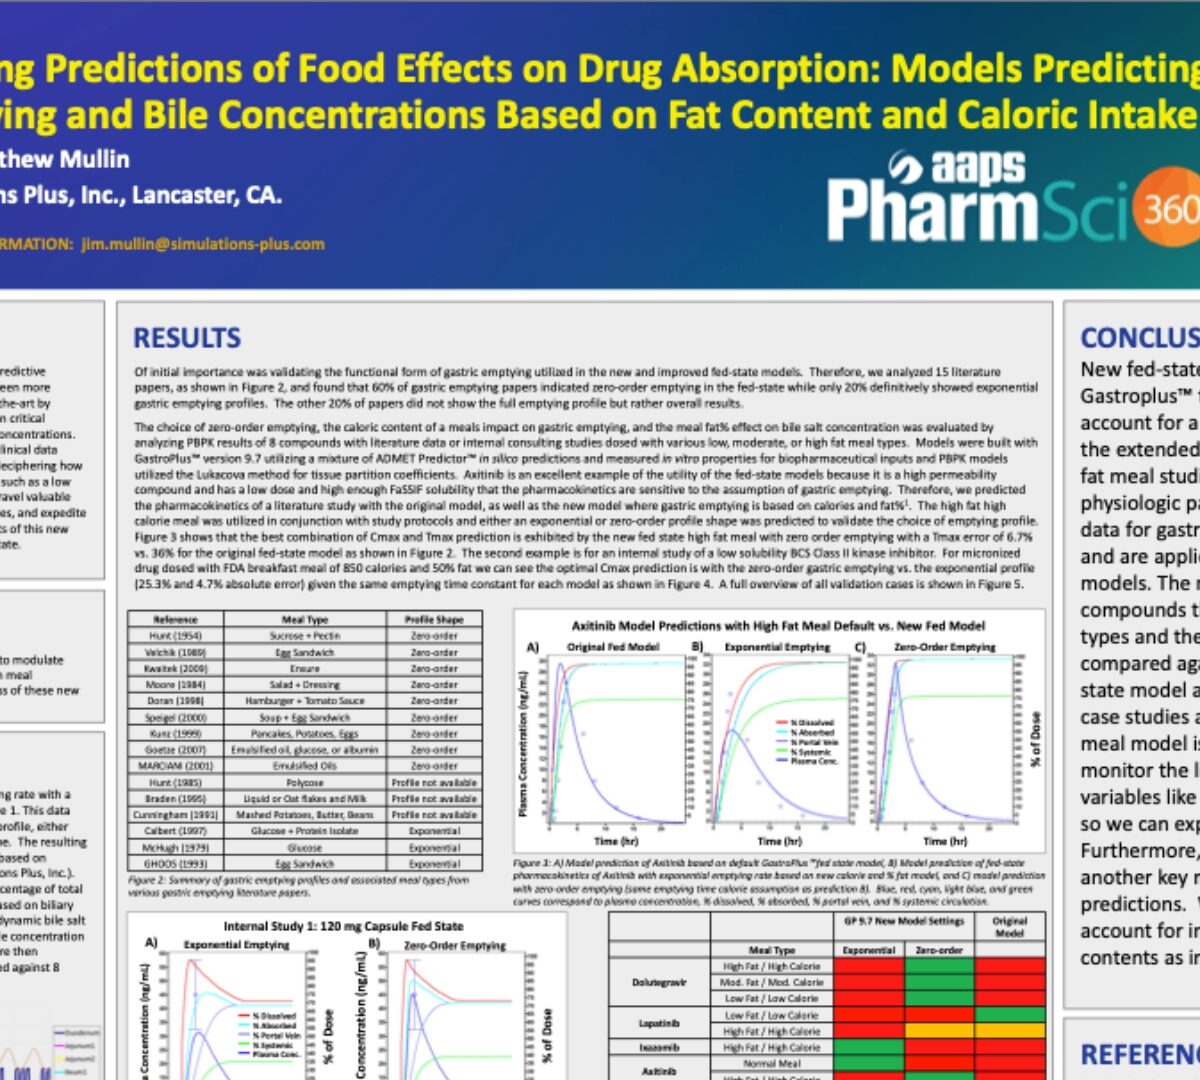 Refining Predictions of Food Effects on Drug Absorption: Models Predicting Gastric Emptying and Bile Concentrations Based on Fat Content and Caloric Intake